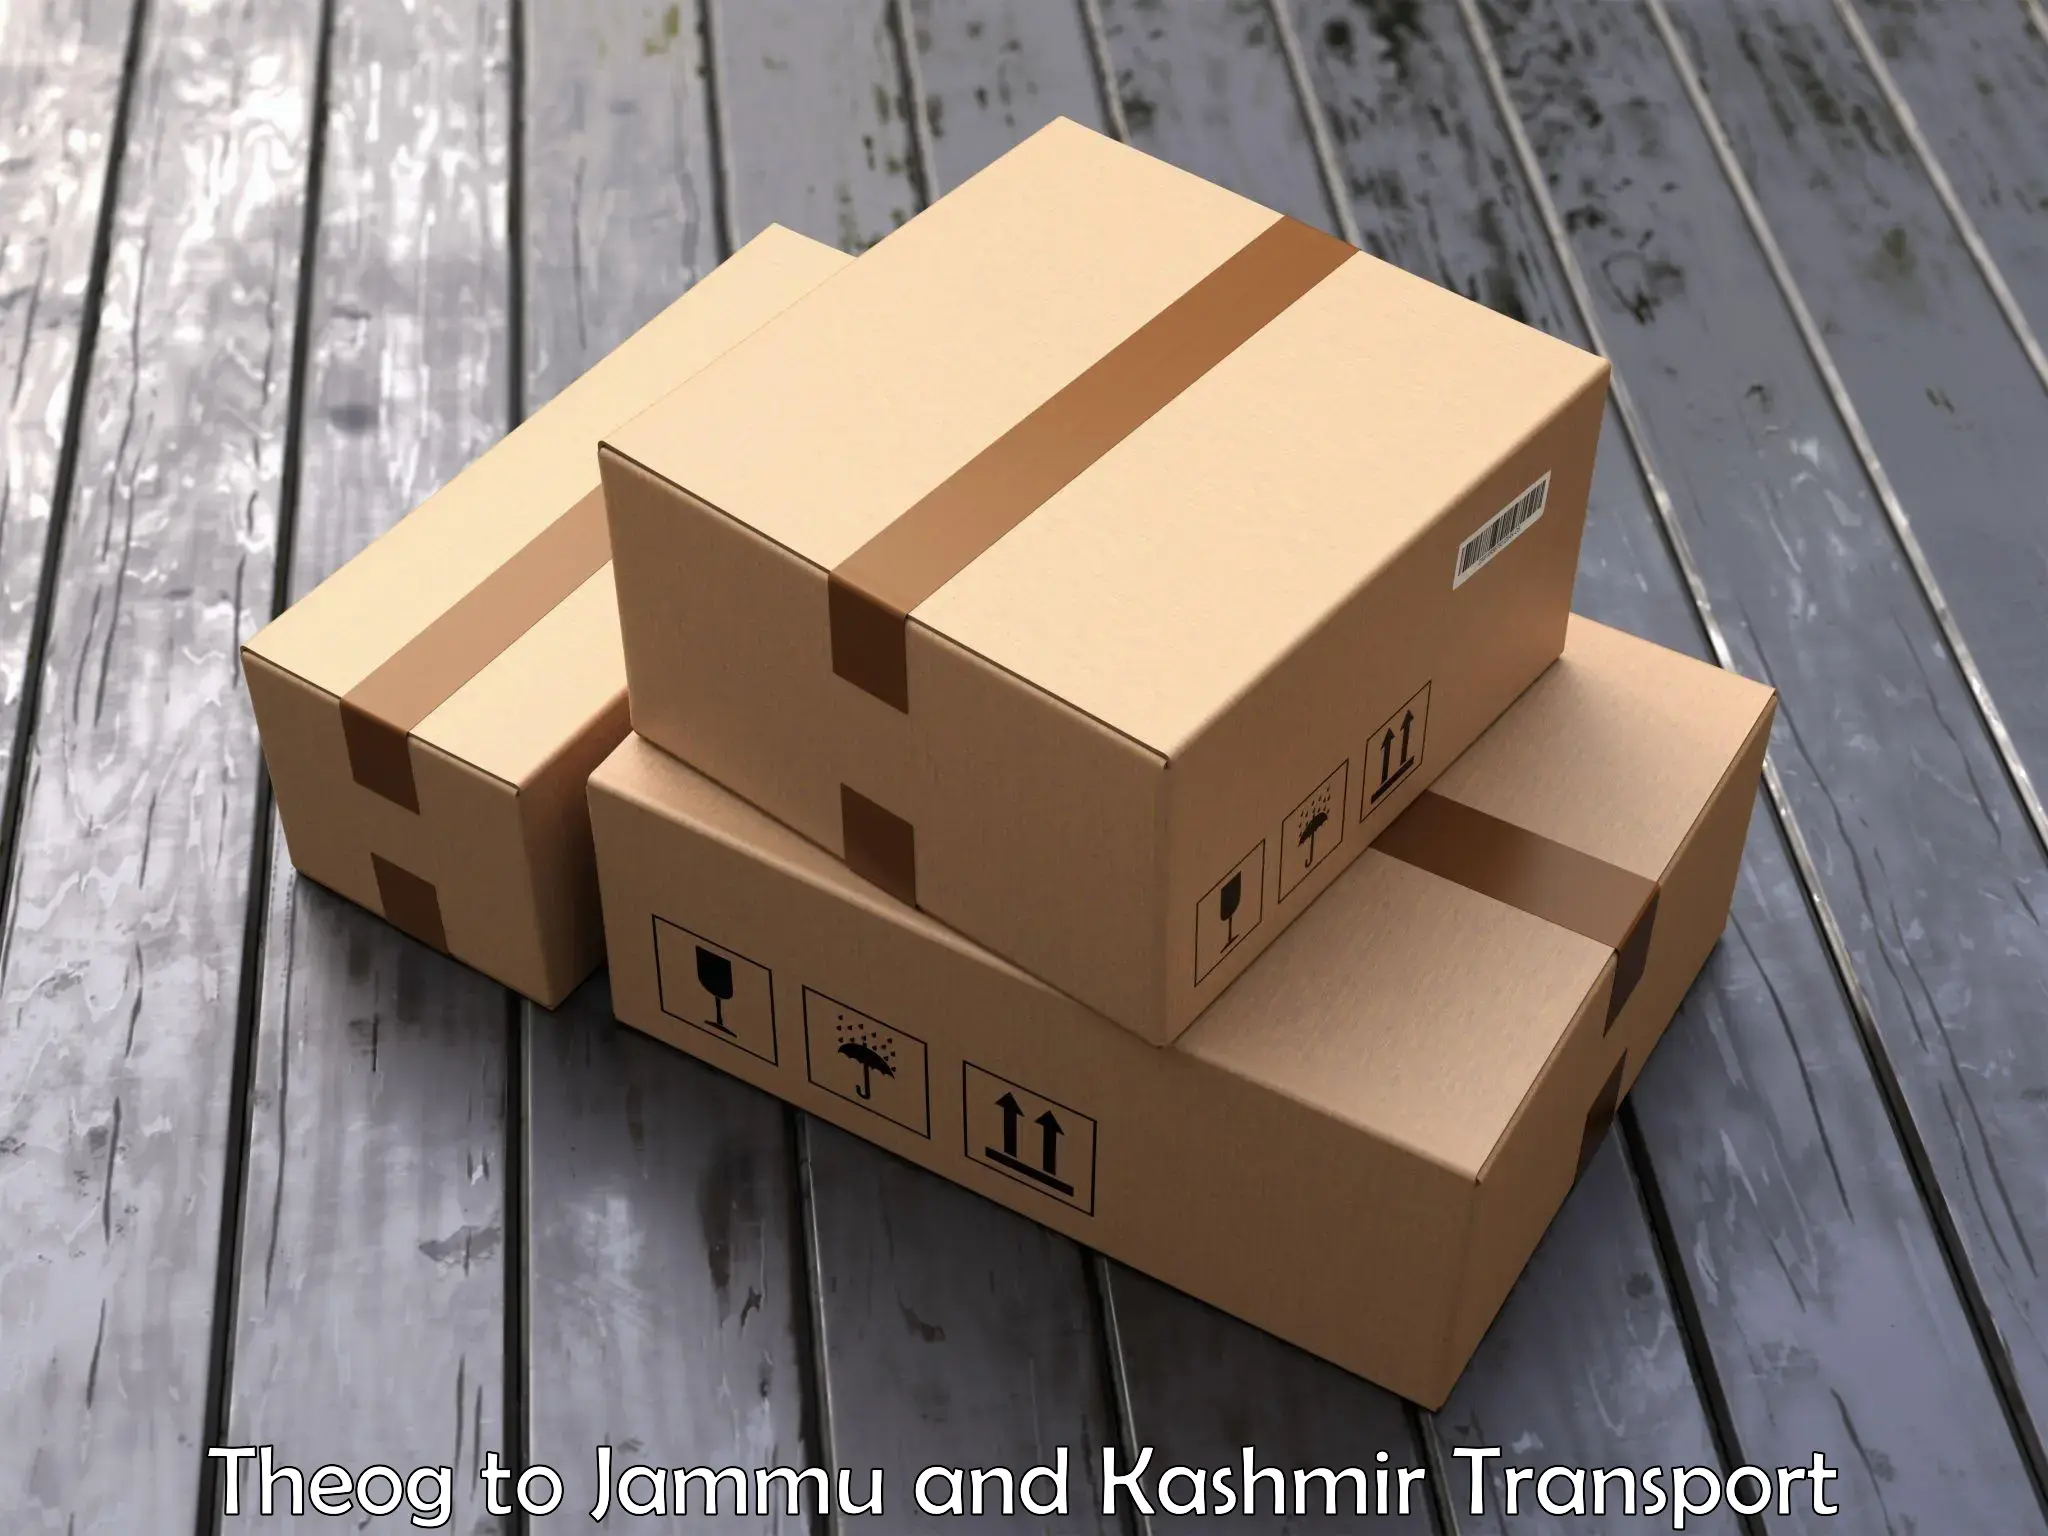 Truck transport companies in India Theog to Baramulla